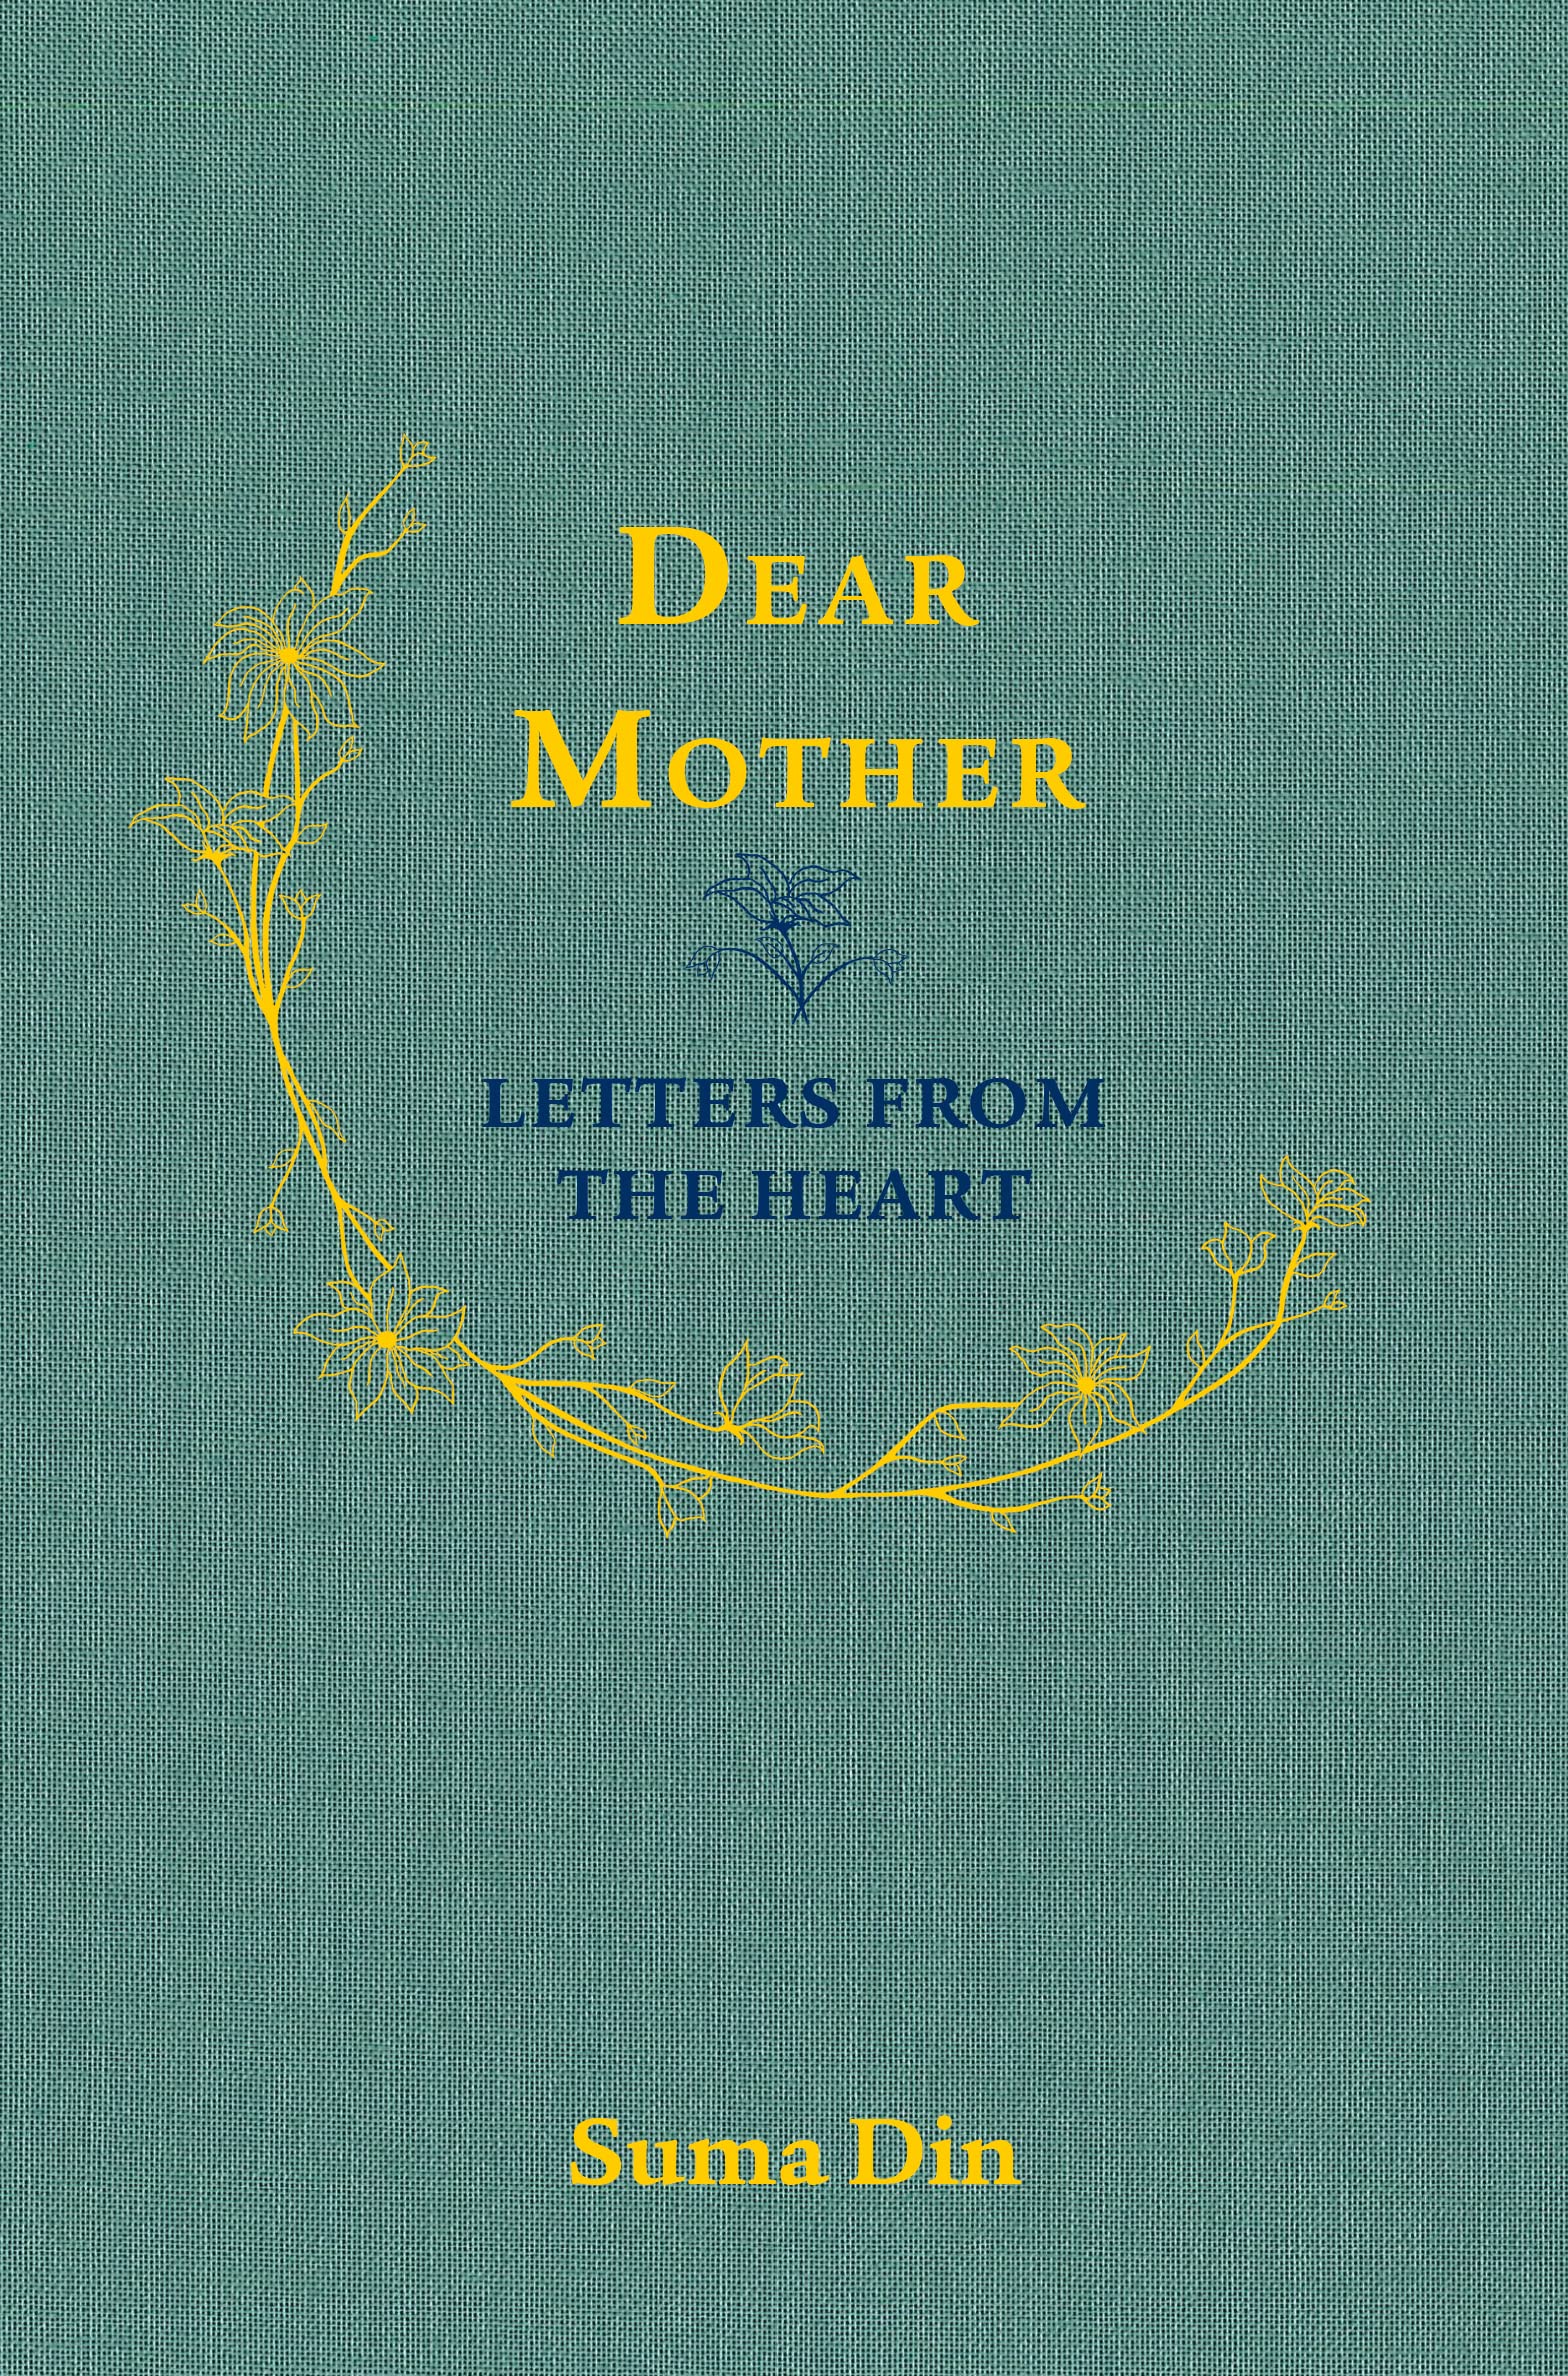 Dear Mother - Letters From the Heart